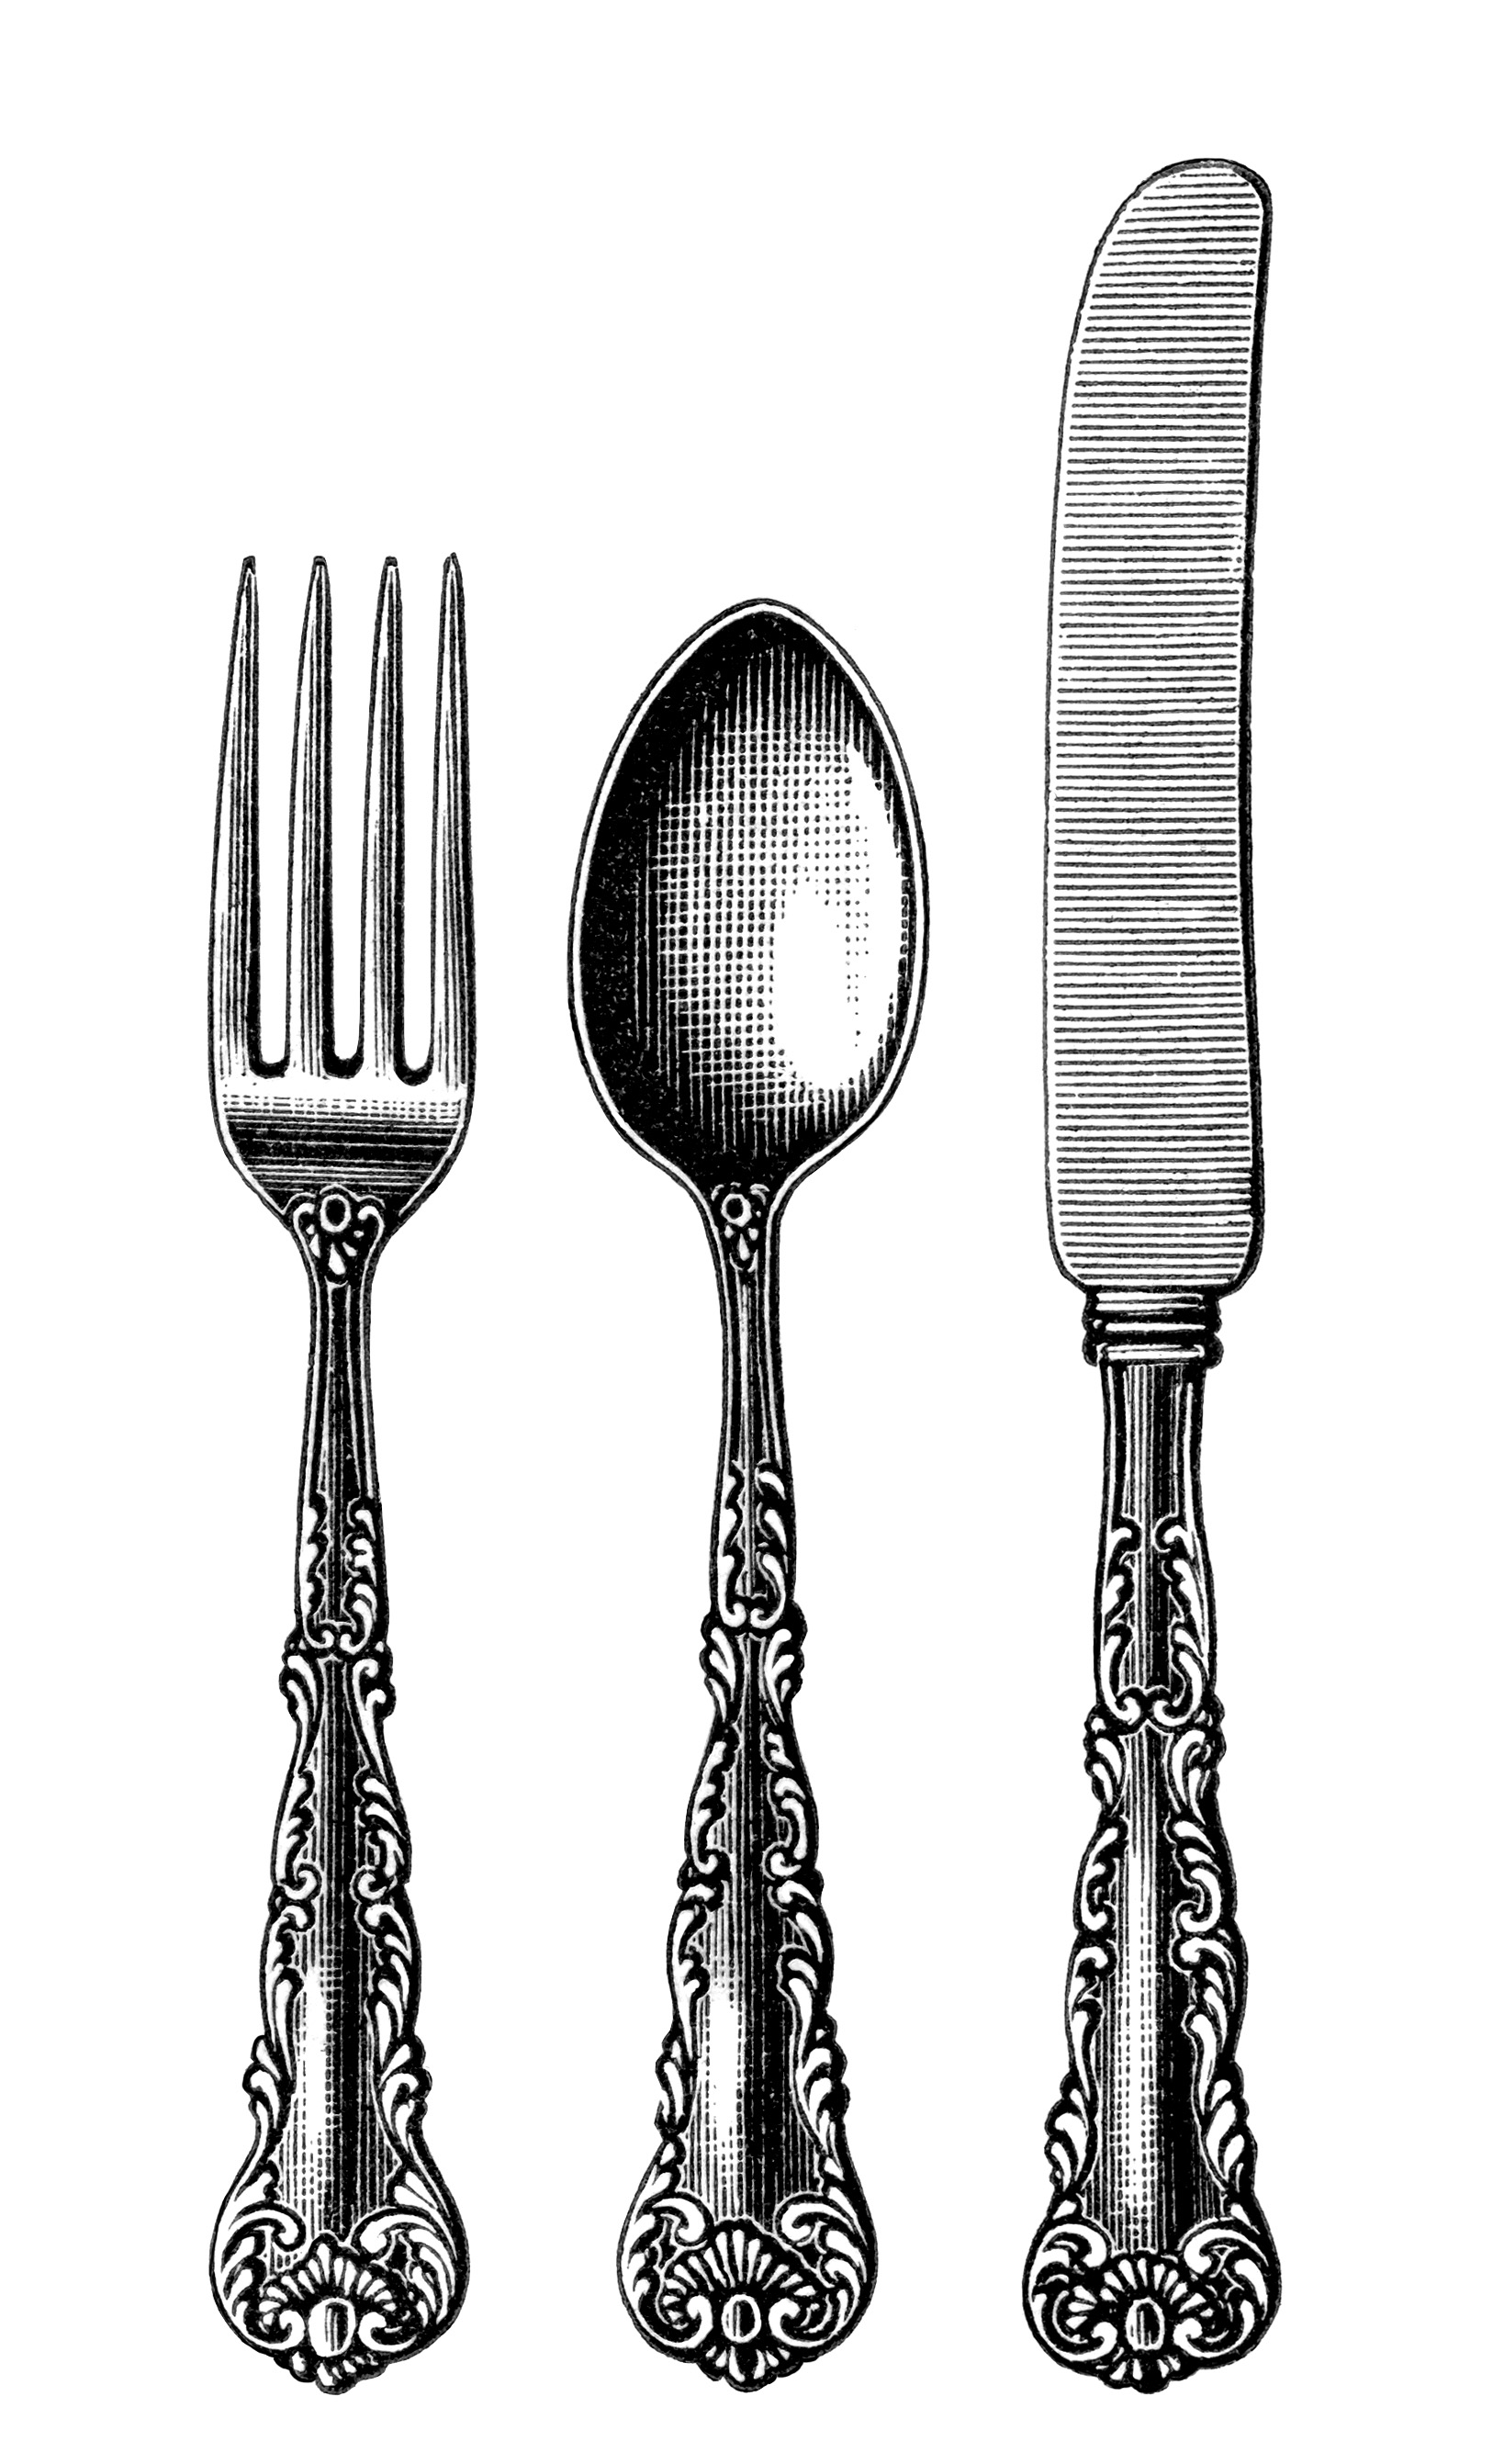 vintage cutlery clipart, black and white clip art, old fashioned spoon fork knife image, antique silverware pattern illustration, kitchen printable